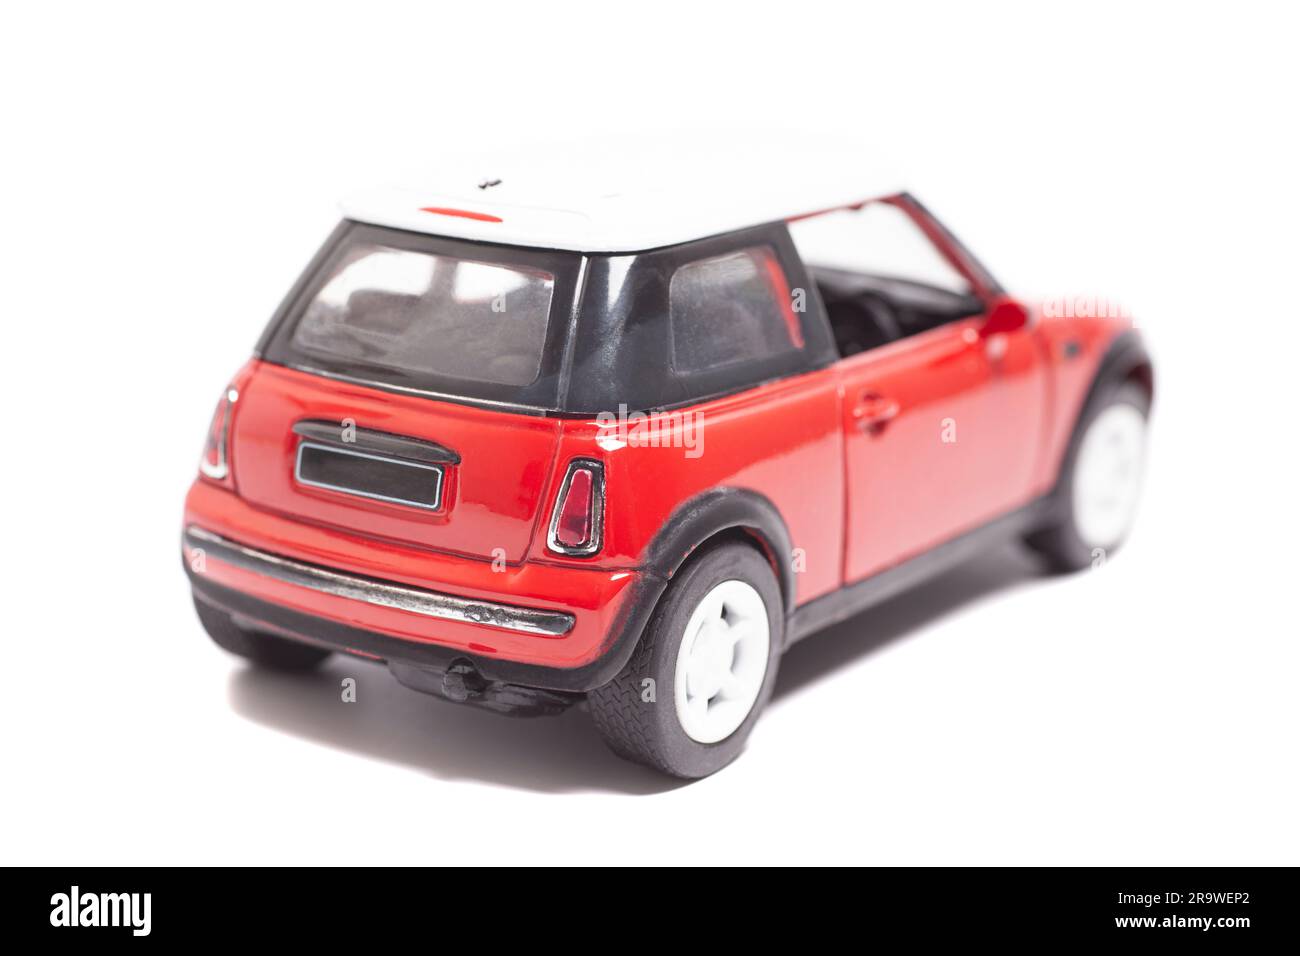 Red vintage mini car model,top view. Stock Photo